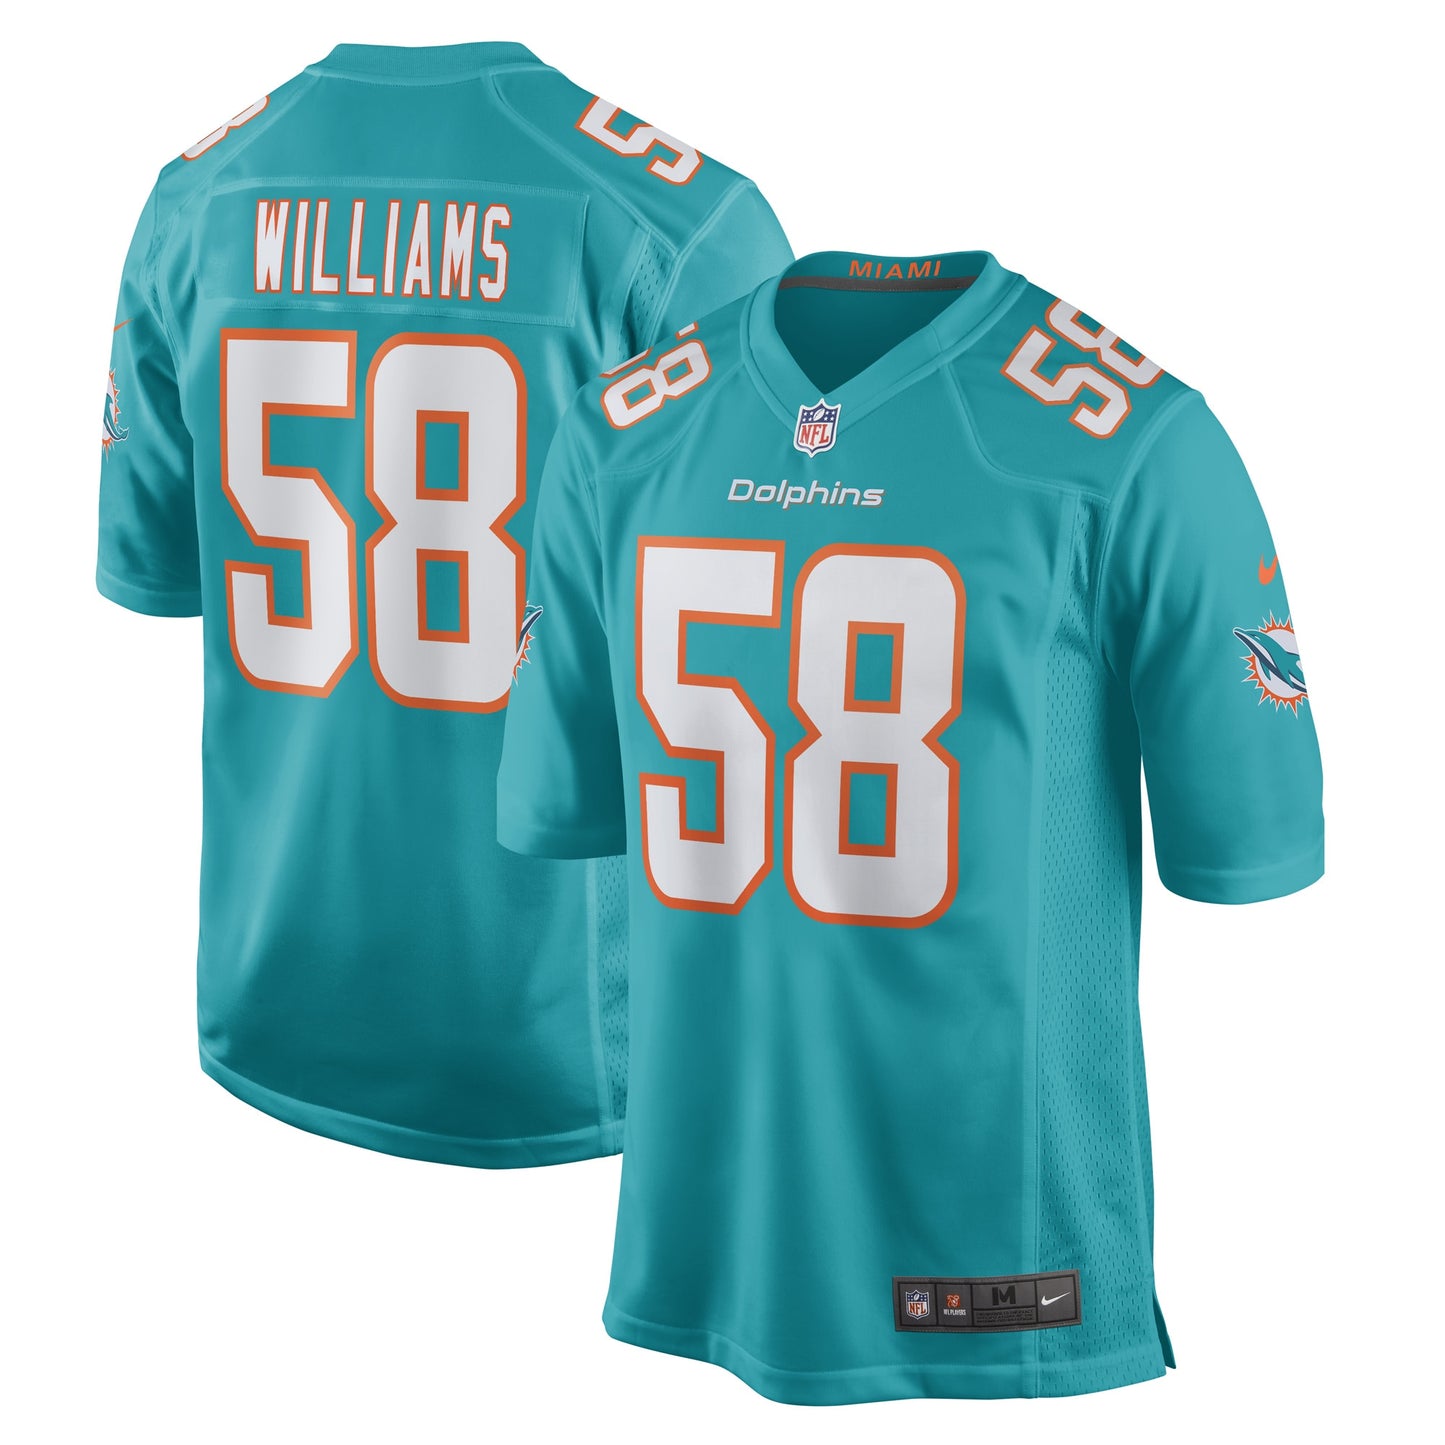 Connor Williams Miami Dolphins Nike Game Player Jersey - Aqua